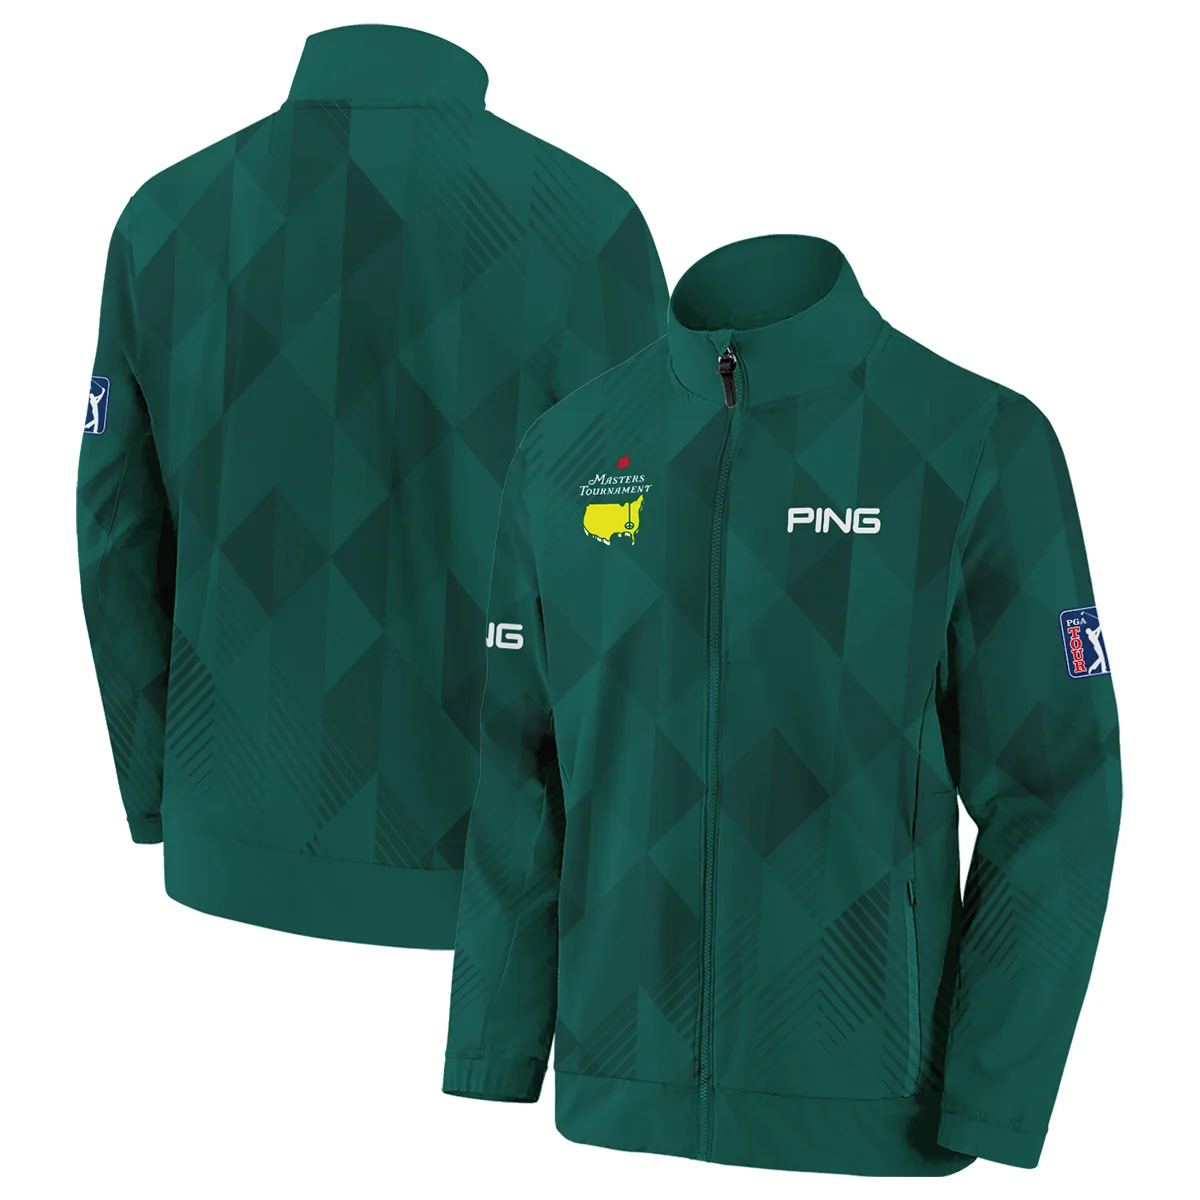 Masters Tournament Golf Sport Ping Hoodie Shirt Sports Triangle Abstract Green Hoodie Shirt